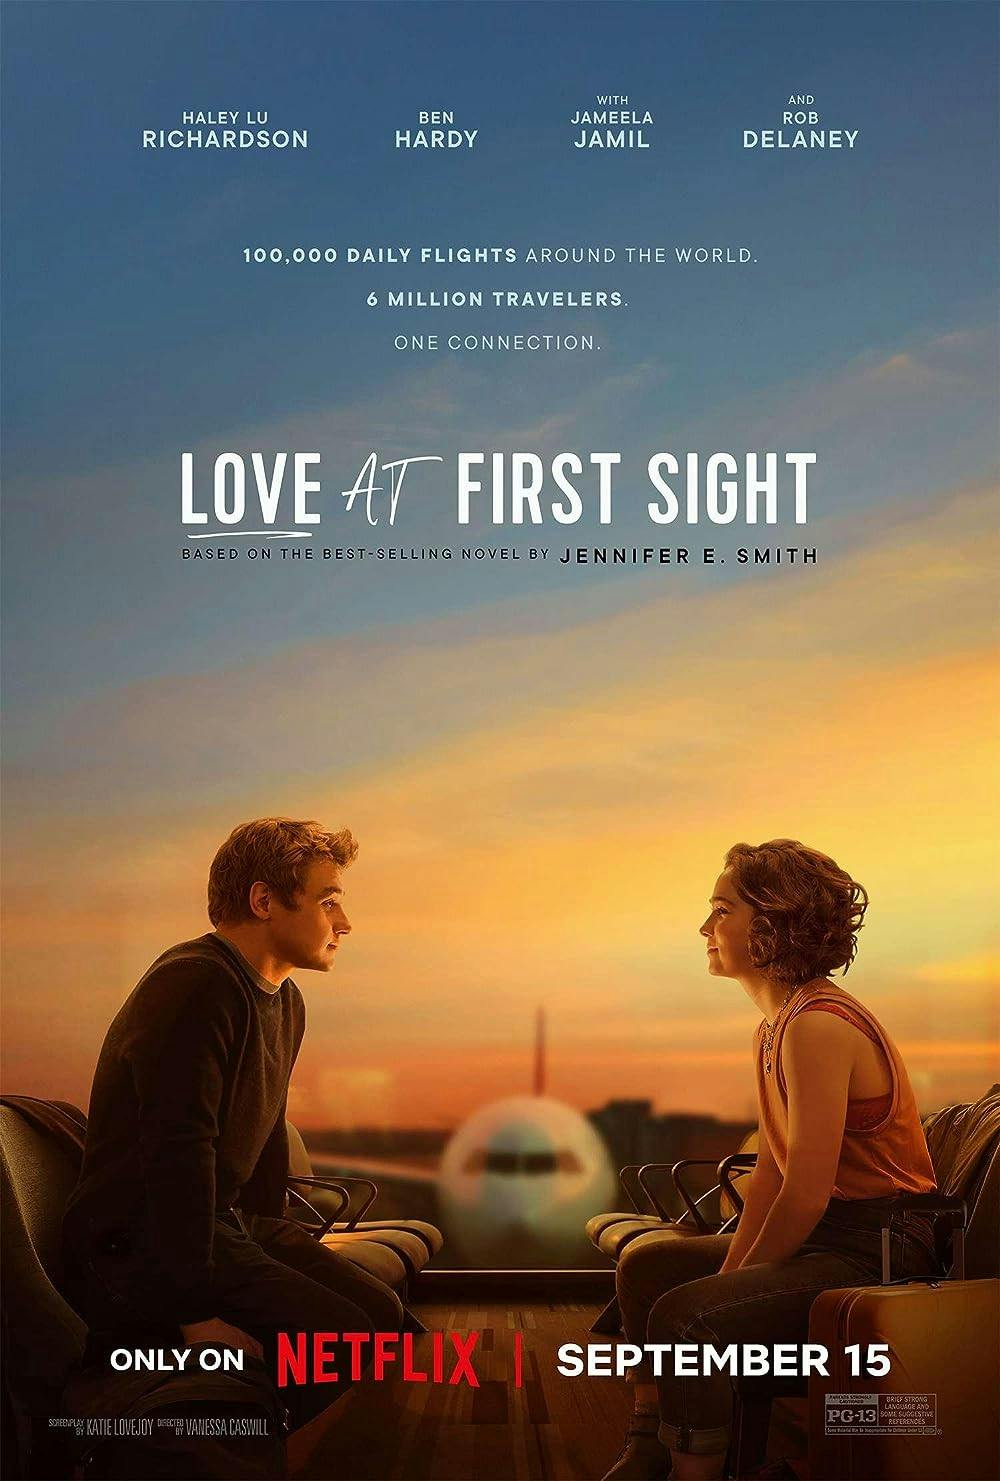 Review: 'Love at First Sight' is a cliché, lighthearted romantic comedy